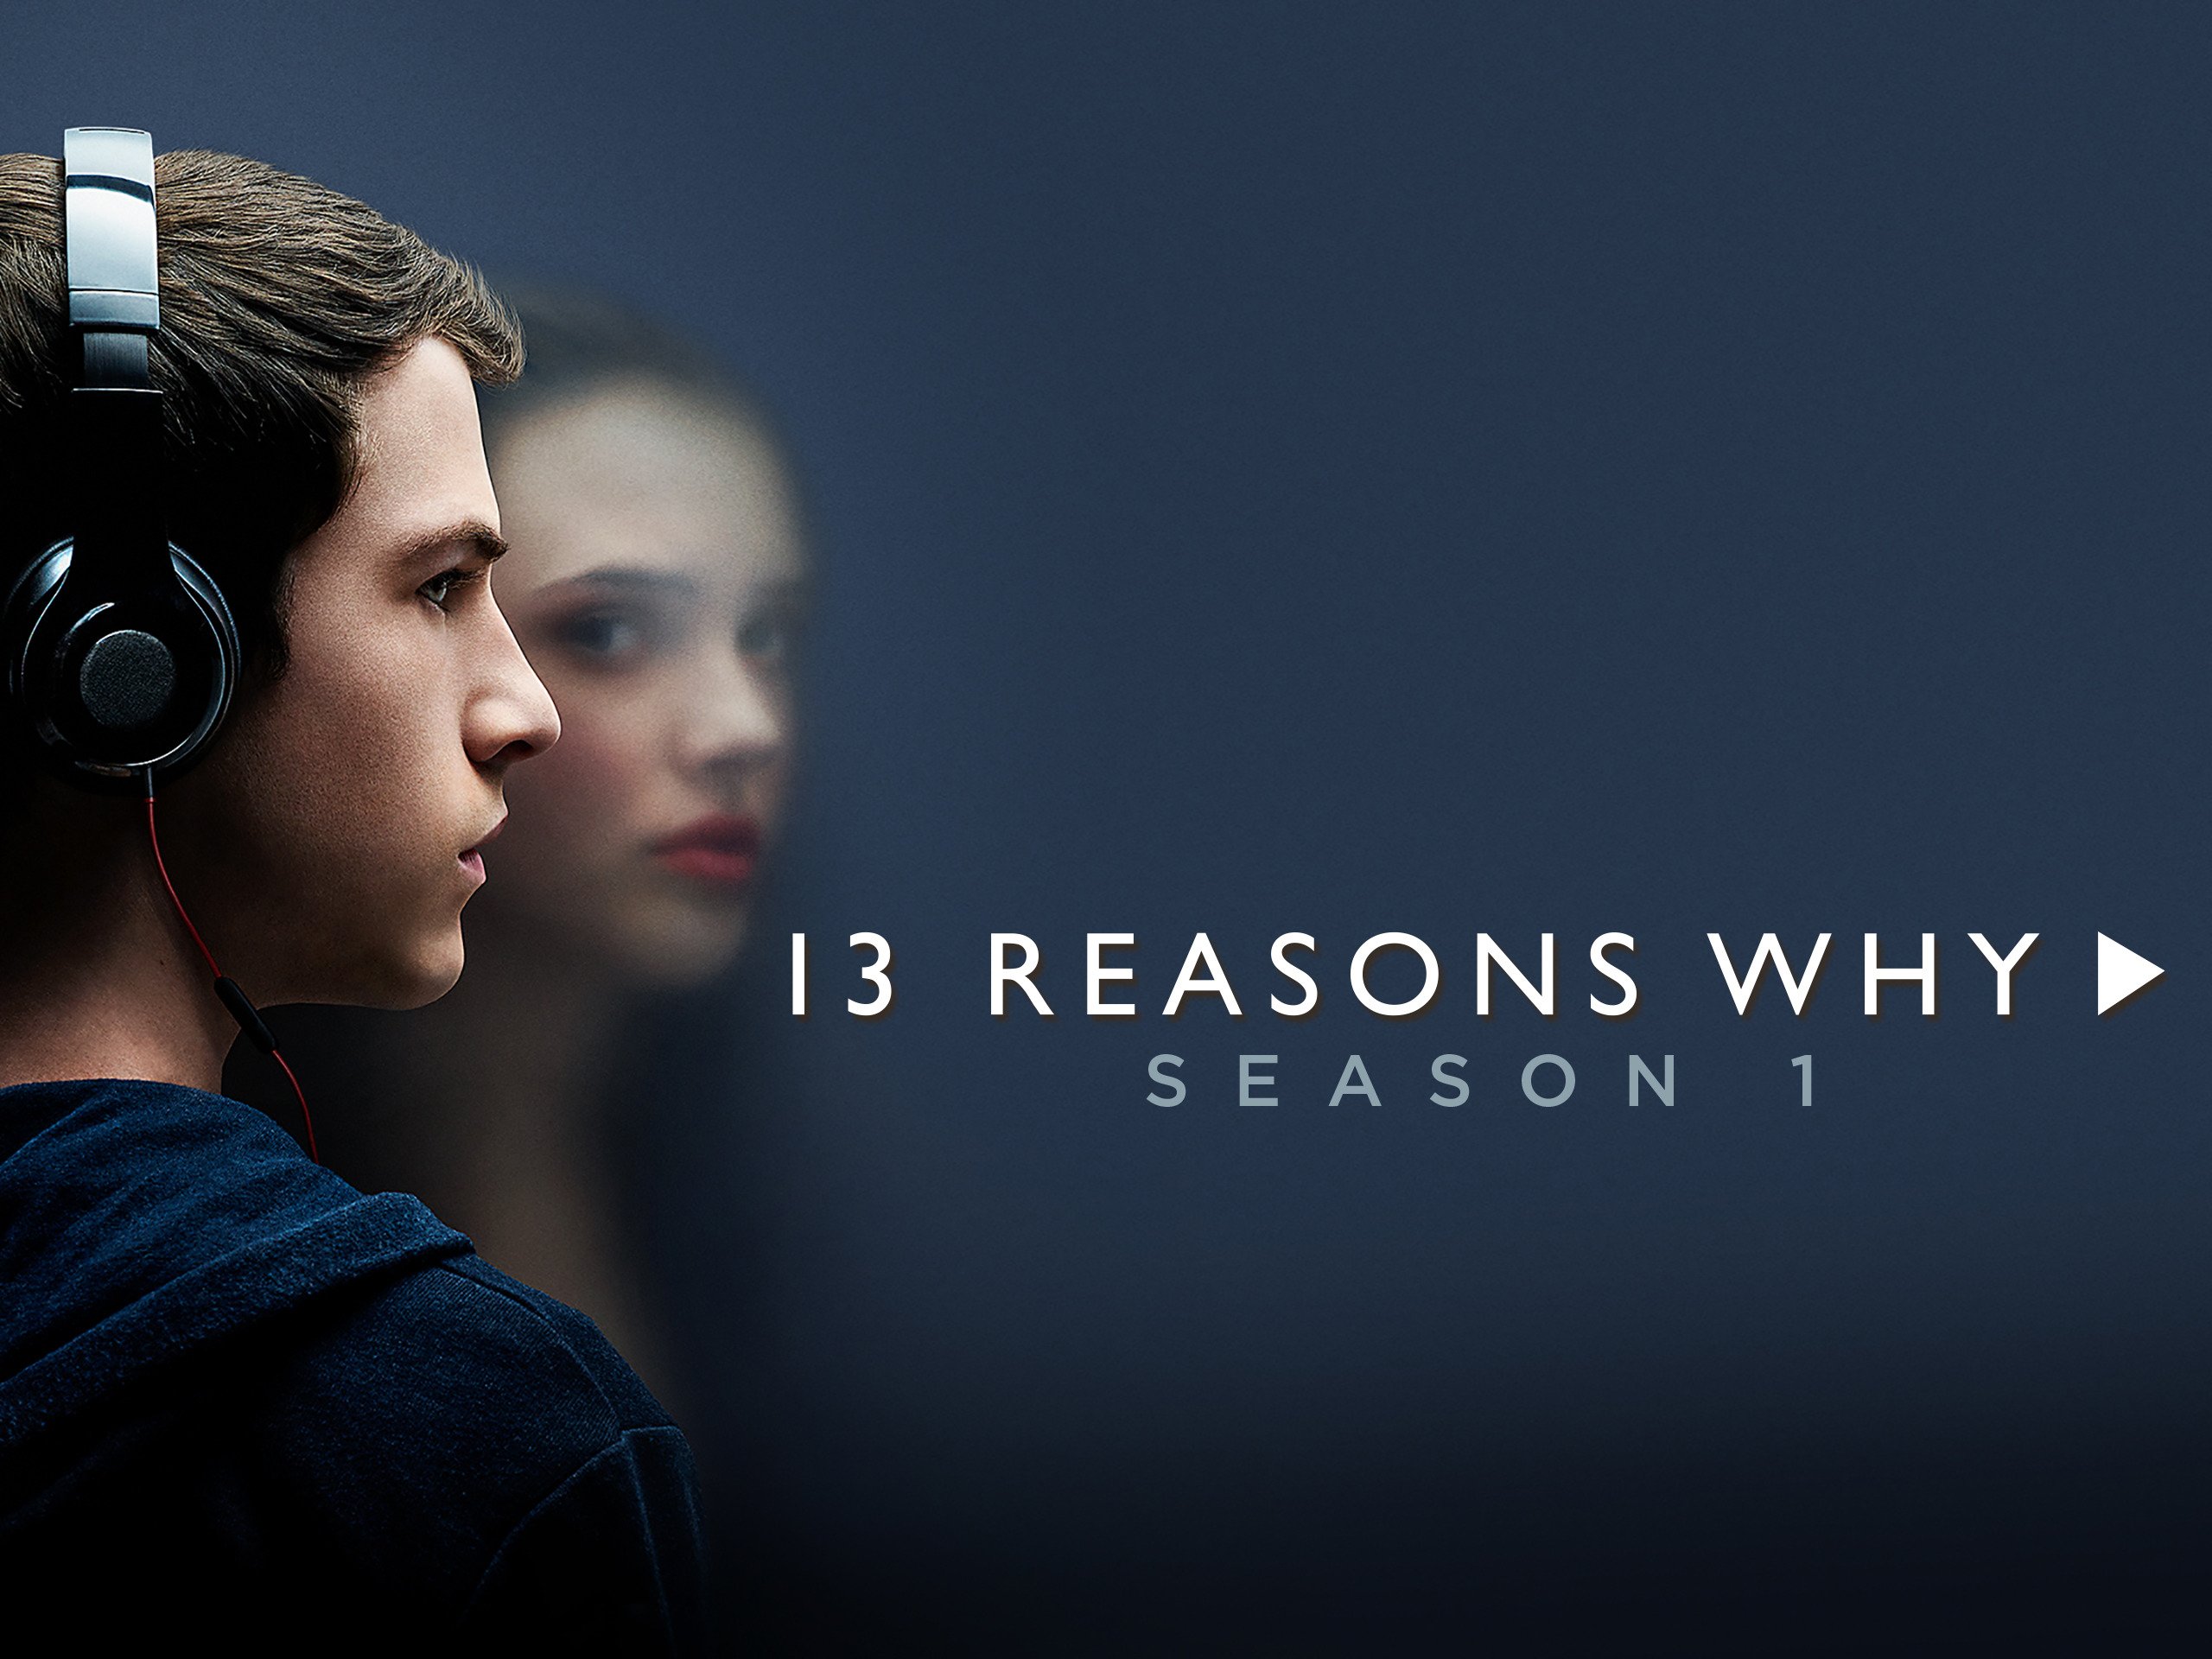 Clay 13 Reasons Why Poster Wallpapers